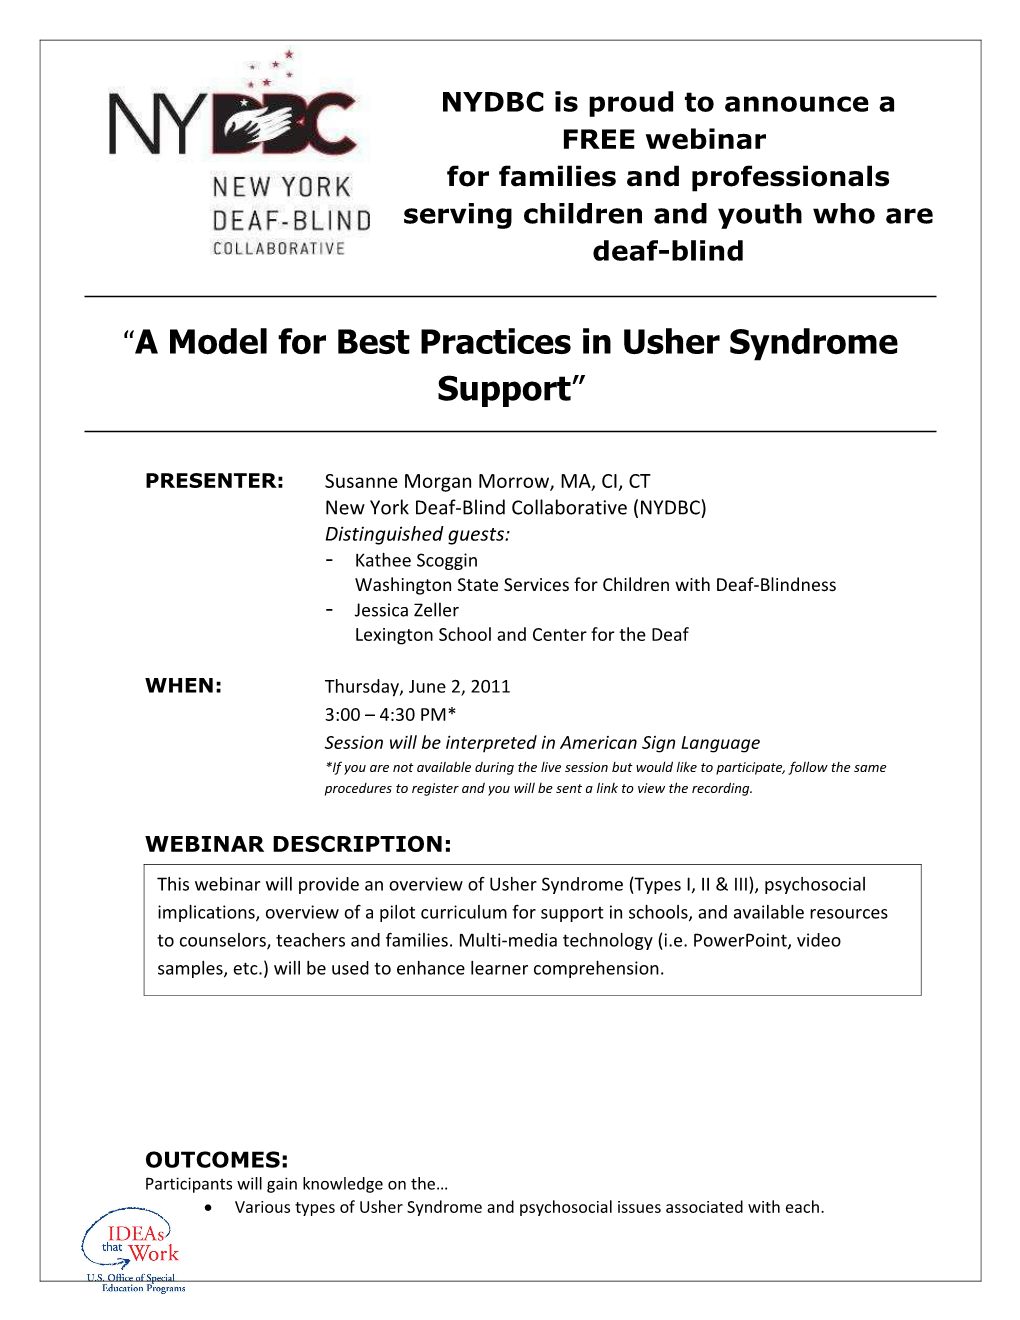 NYDBC Is Proud to Announce a FREE Webinar